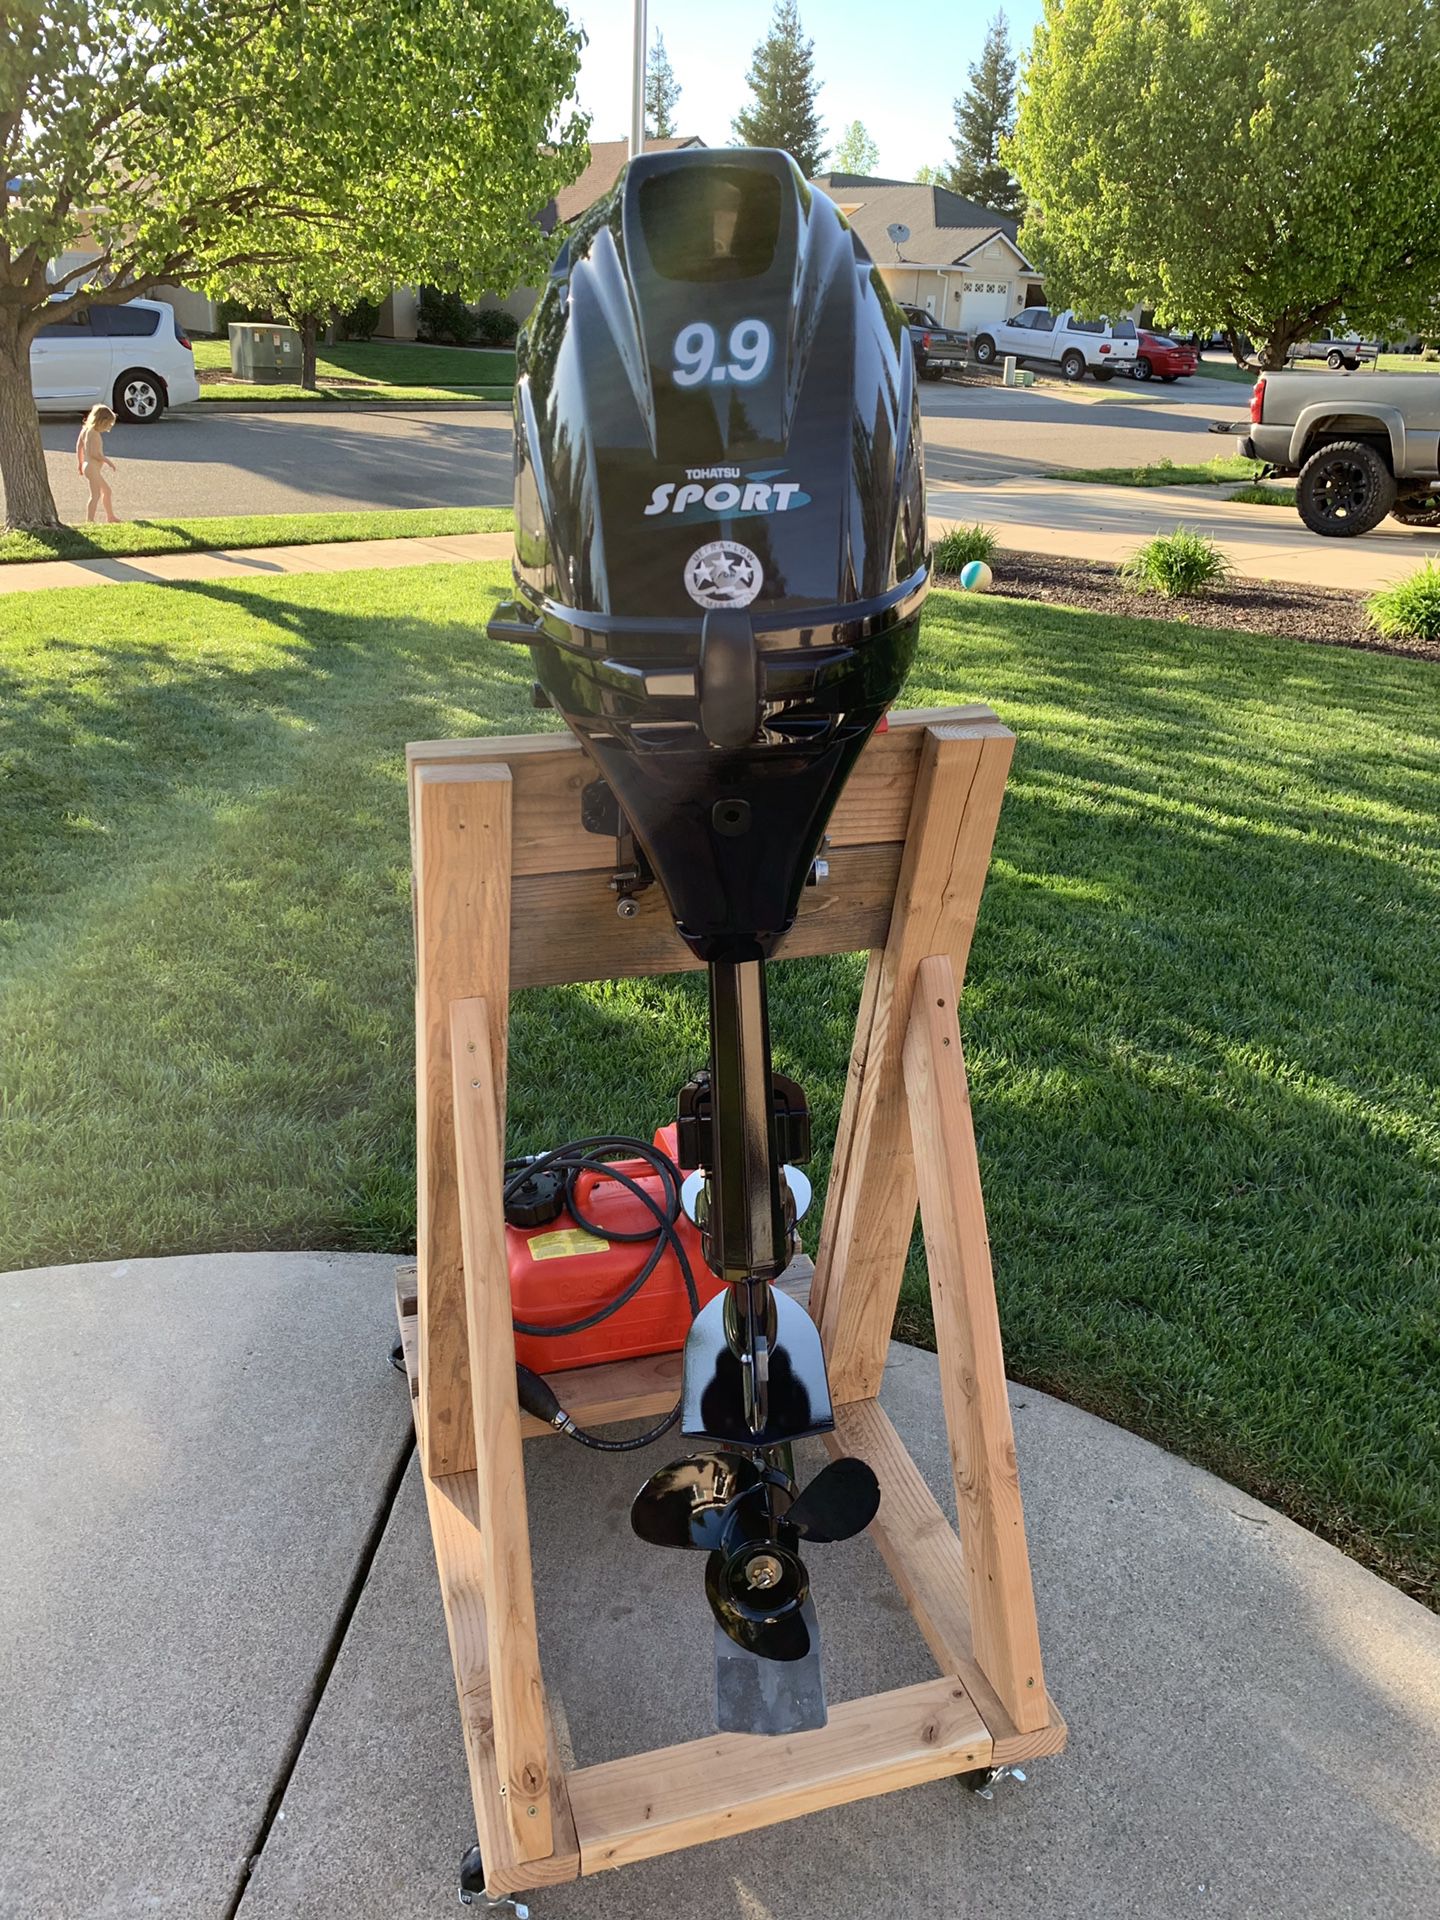 Tohatsu 9.9EL 4-stroke outboard motor. Only three hours of use. Still in break in period. Price includes Mac’s prop saver, engine stand, fuel tank an